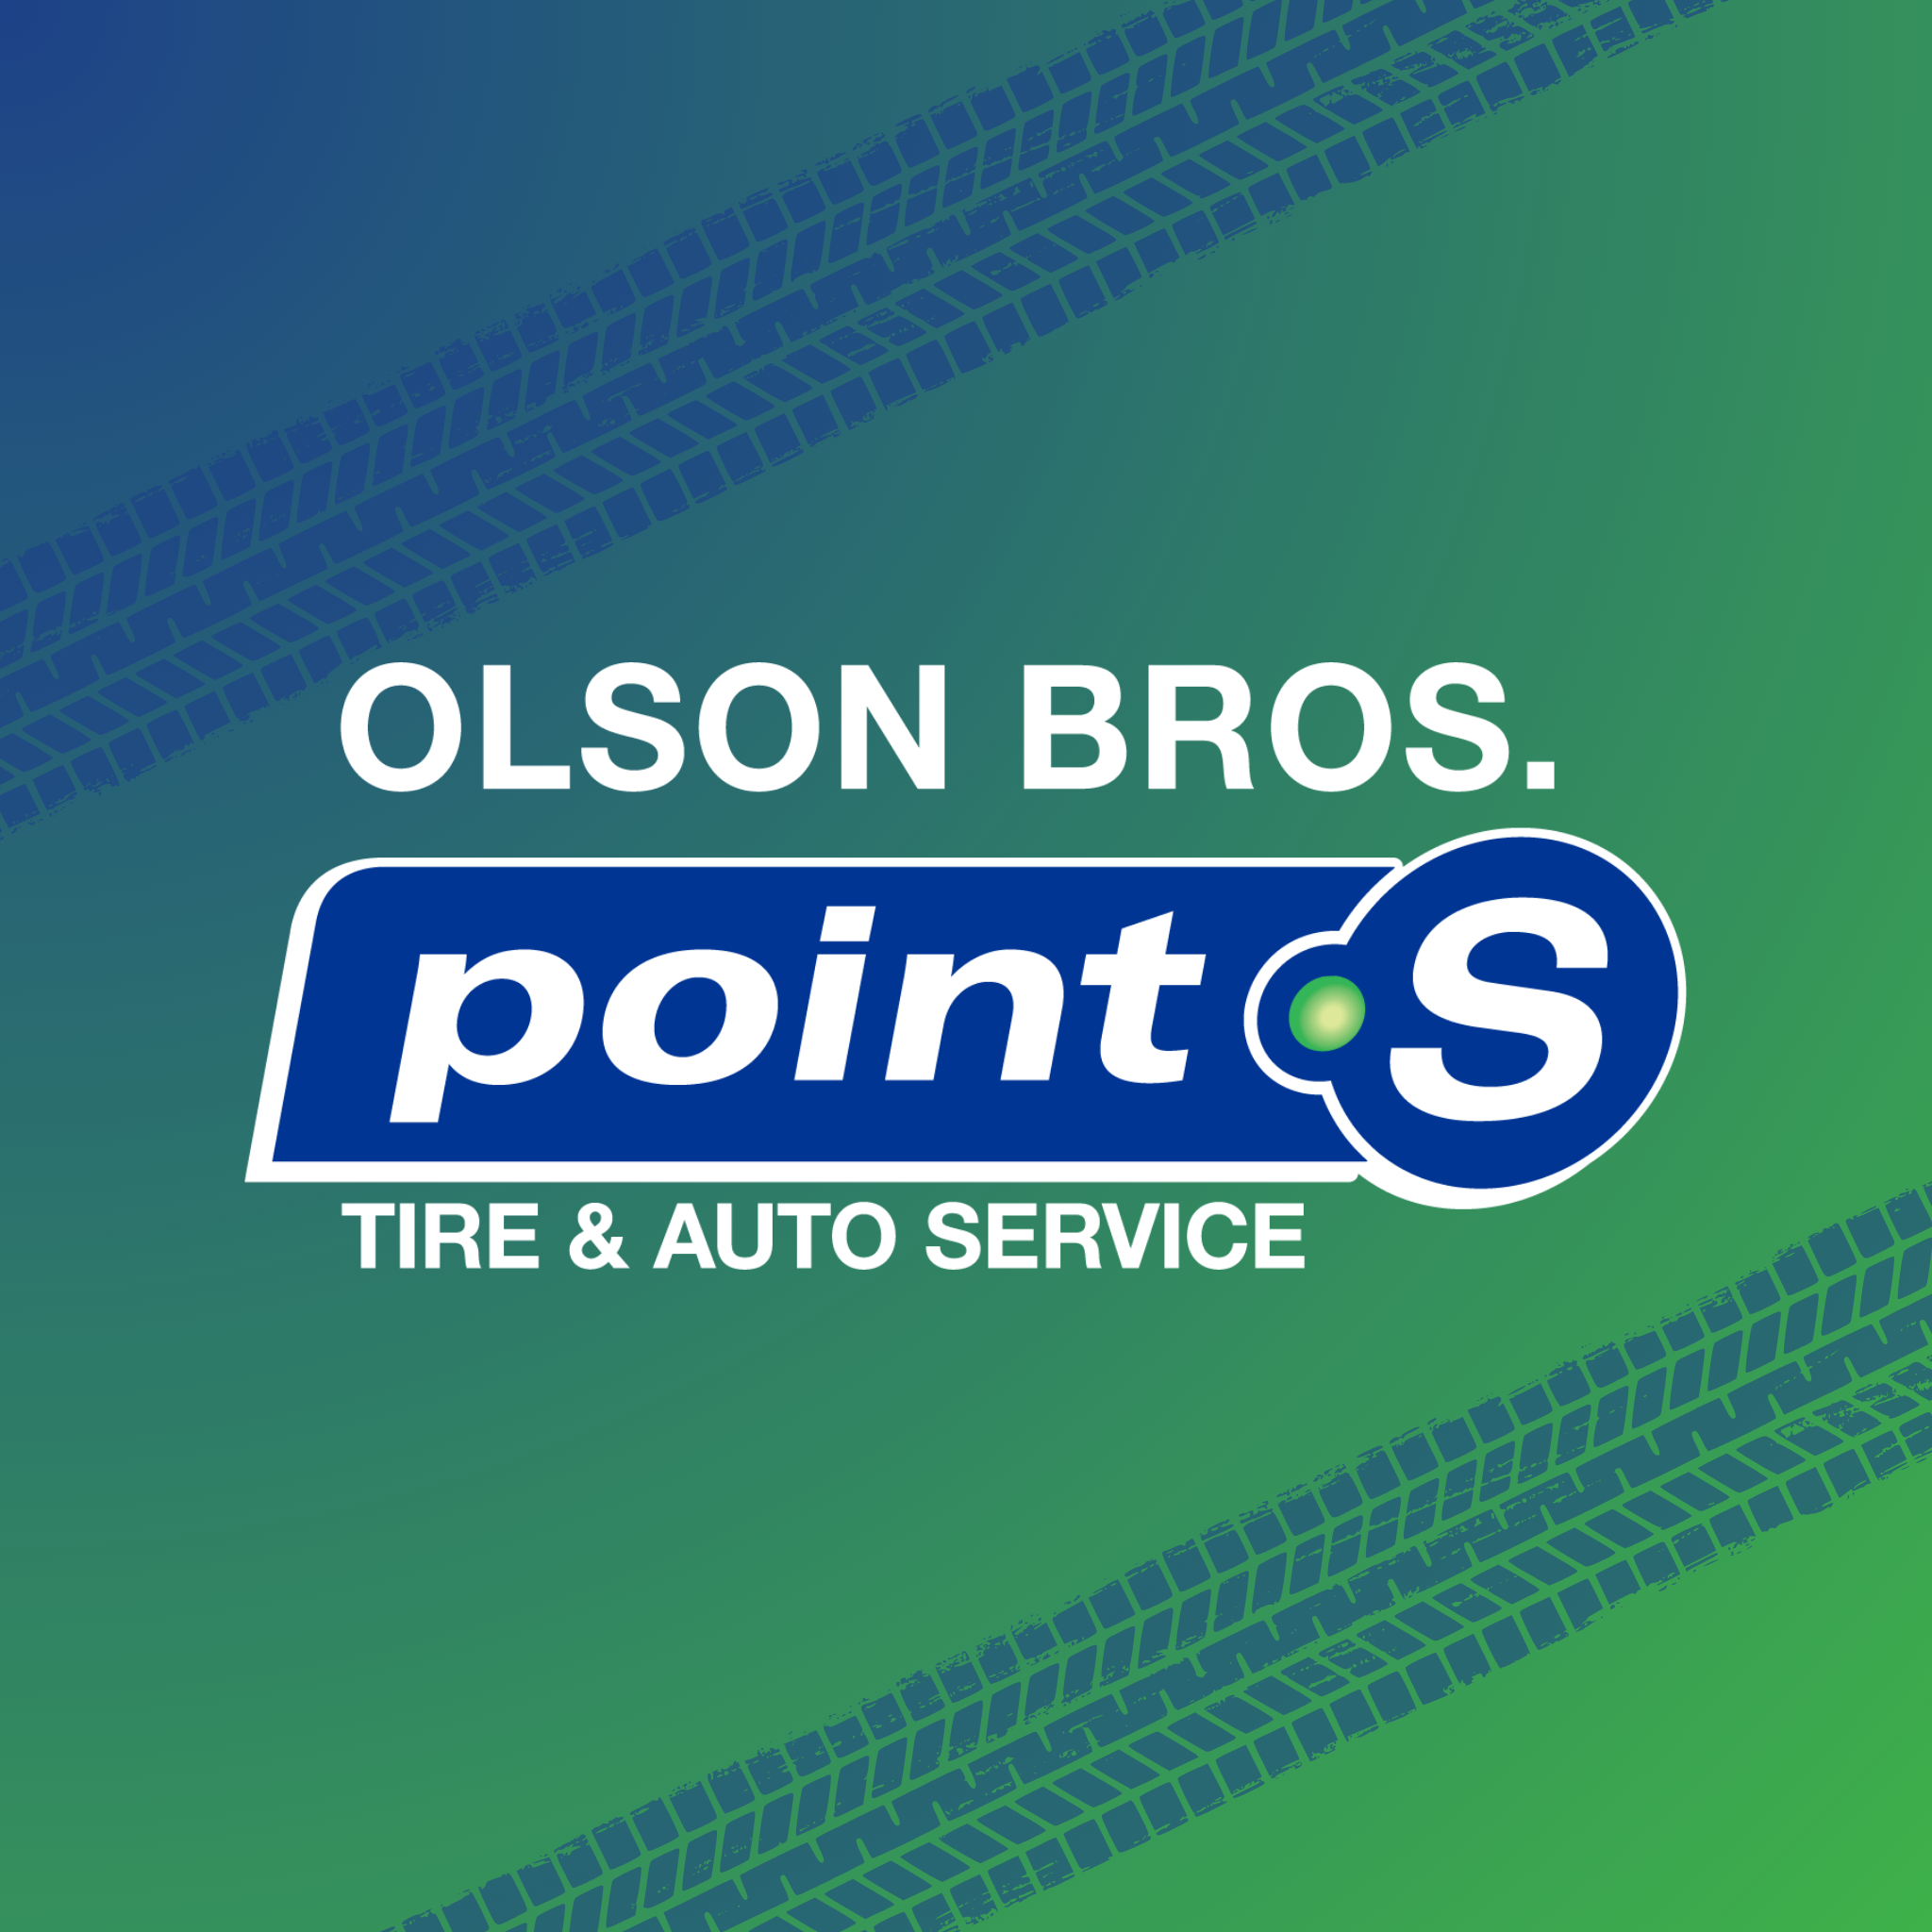 Olson Bros Point S Tire & Auto Service - Milwaukie, OR 97267 - (503)659-5141 | ShowMeLocal.com